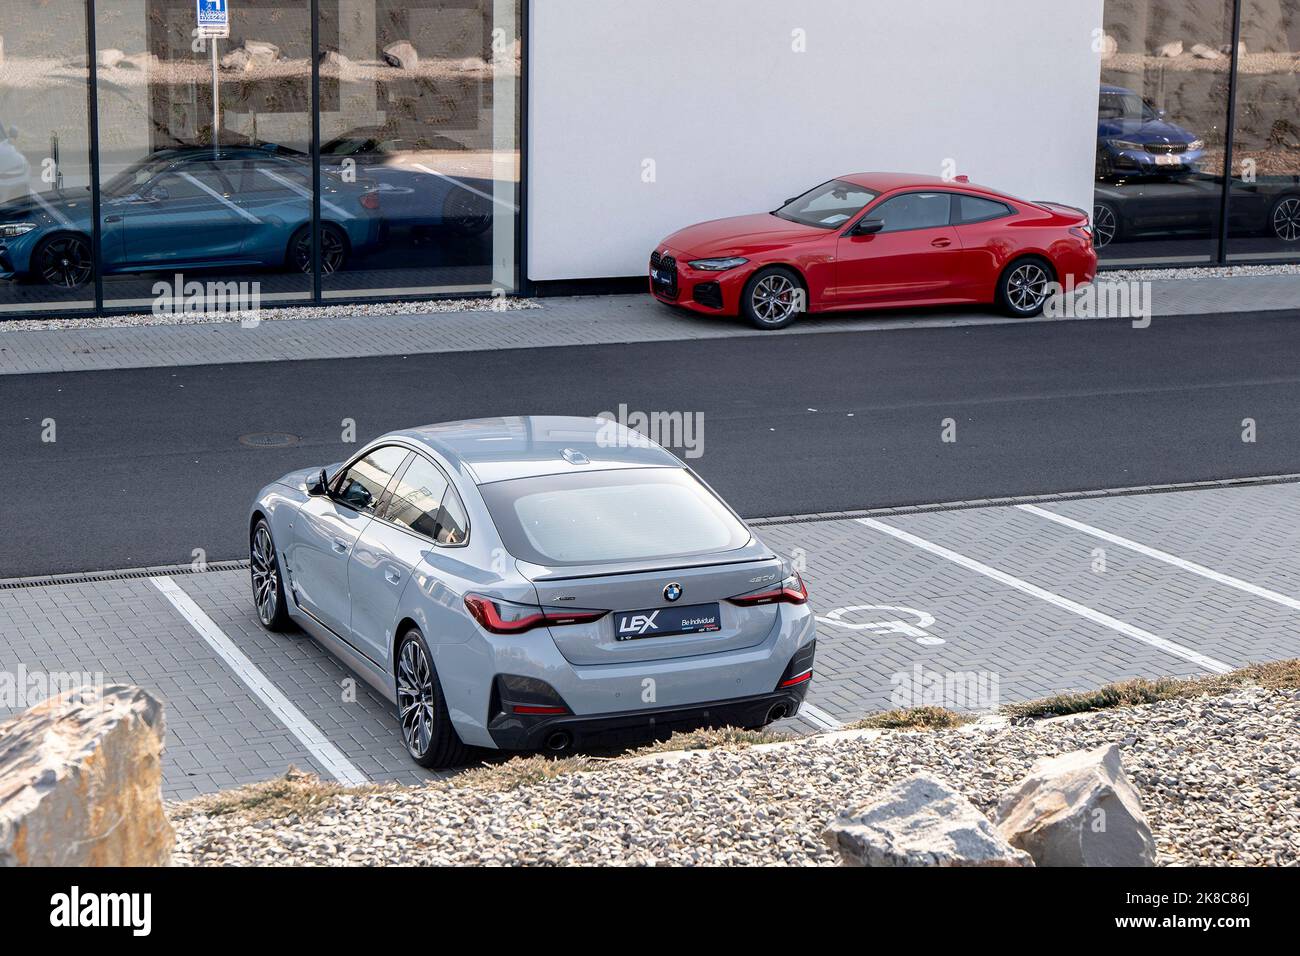 OSTRAVA, CZECH REPUBLIC - MARCH 1, 2022: BMW 420d vehicle in front of the dealership with red coupe in the background Stock Photo